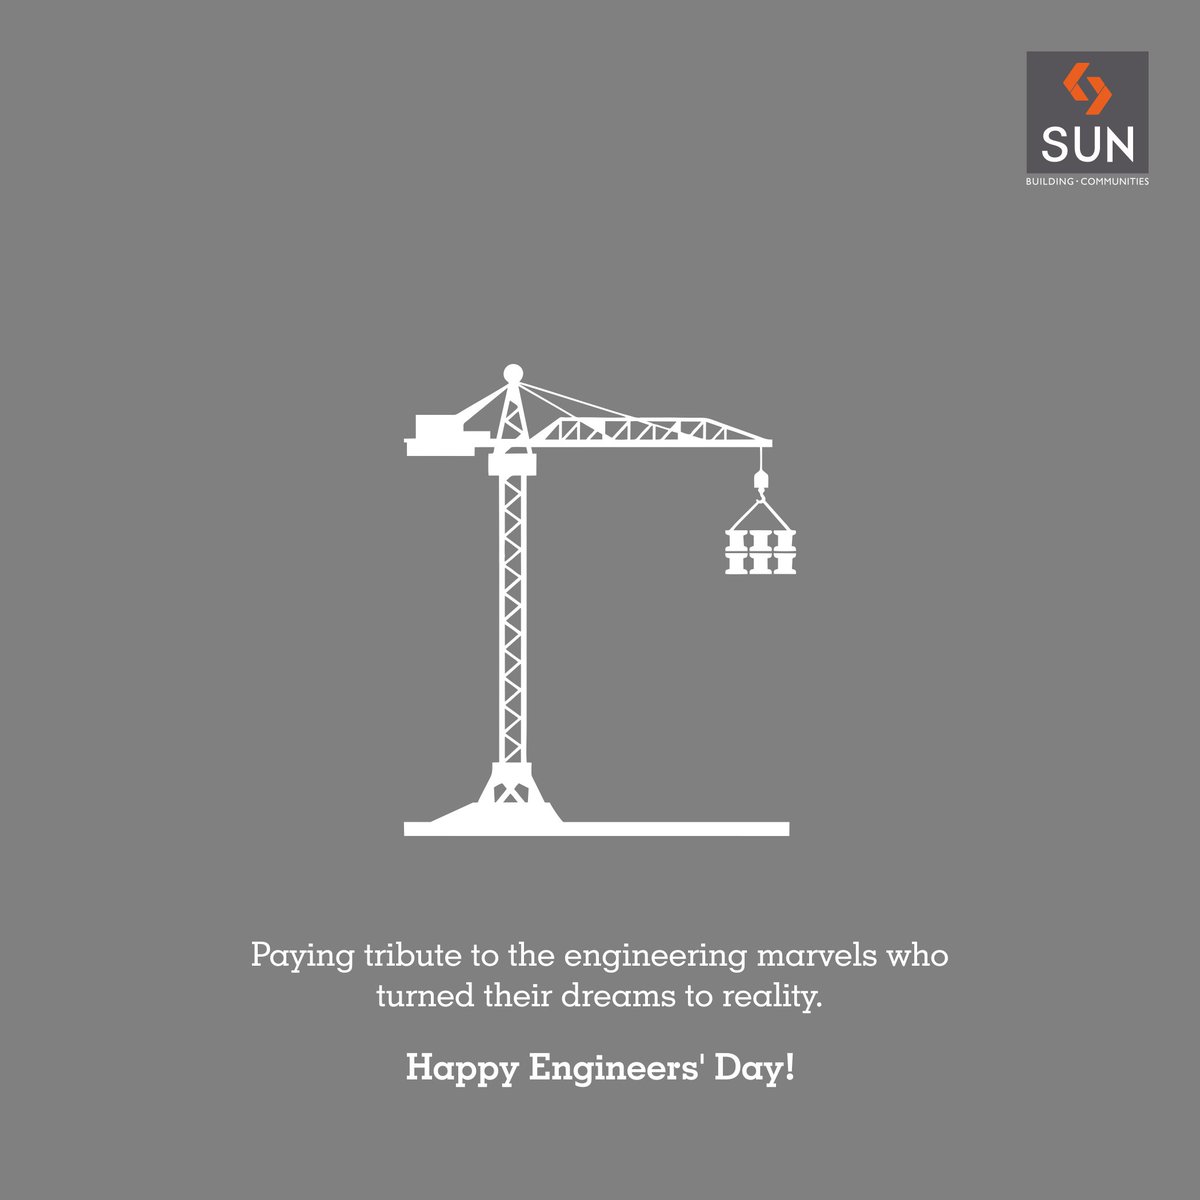 To all engineering marvel across the world, we wish you 
a very happy #EngineersDay! https://t.co/ZpeGbSMi9N